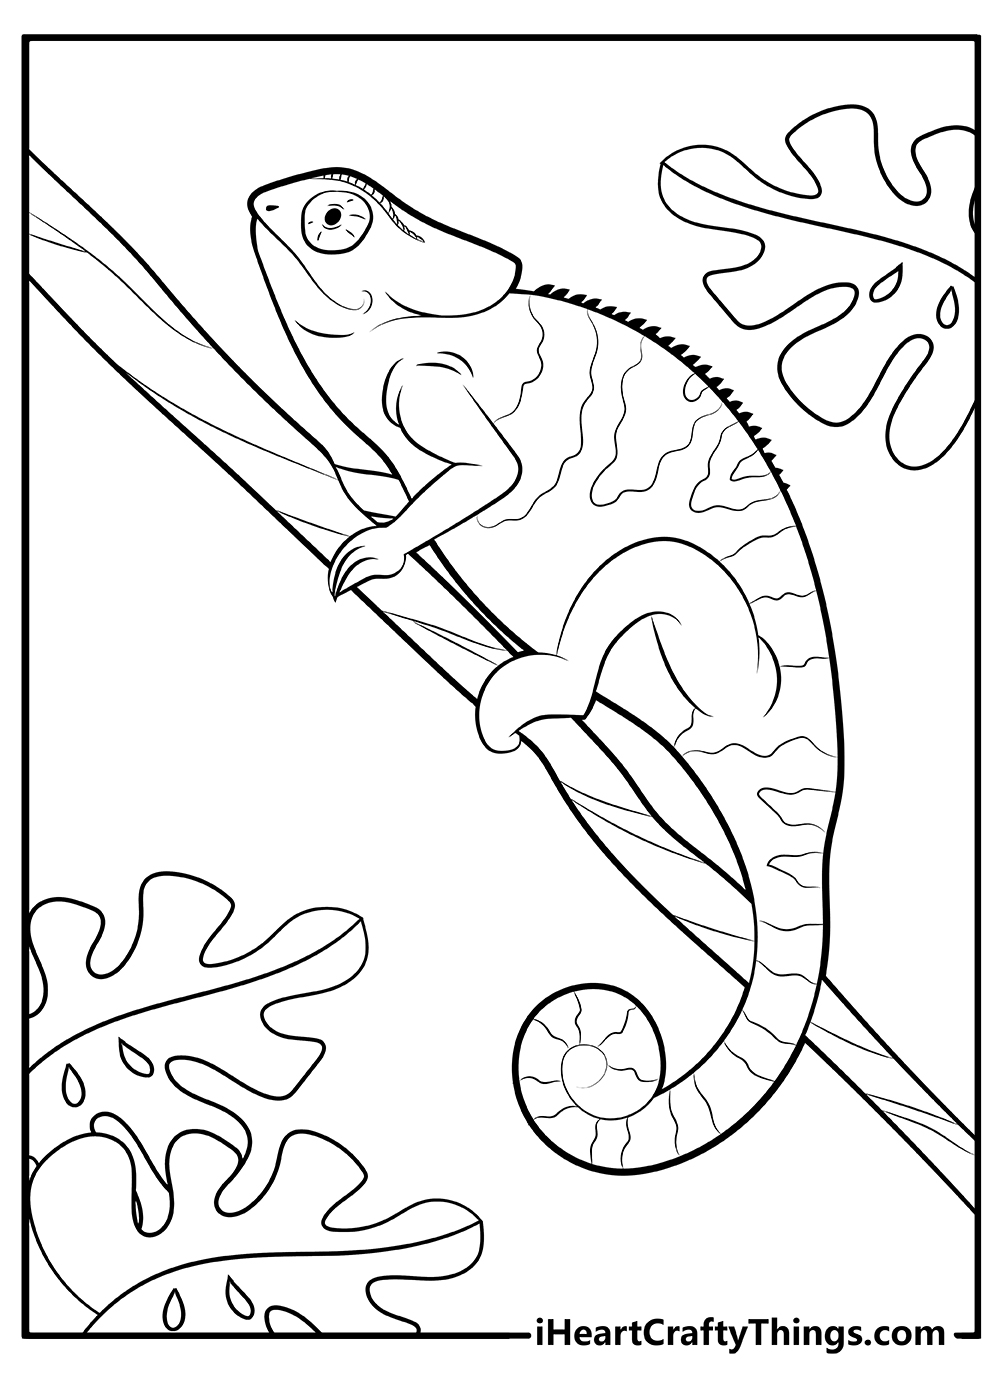 simple Lizard Coloring Pages free download